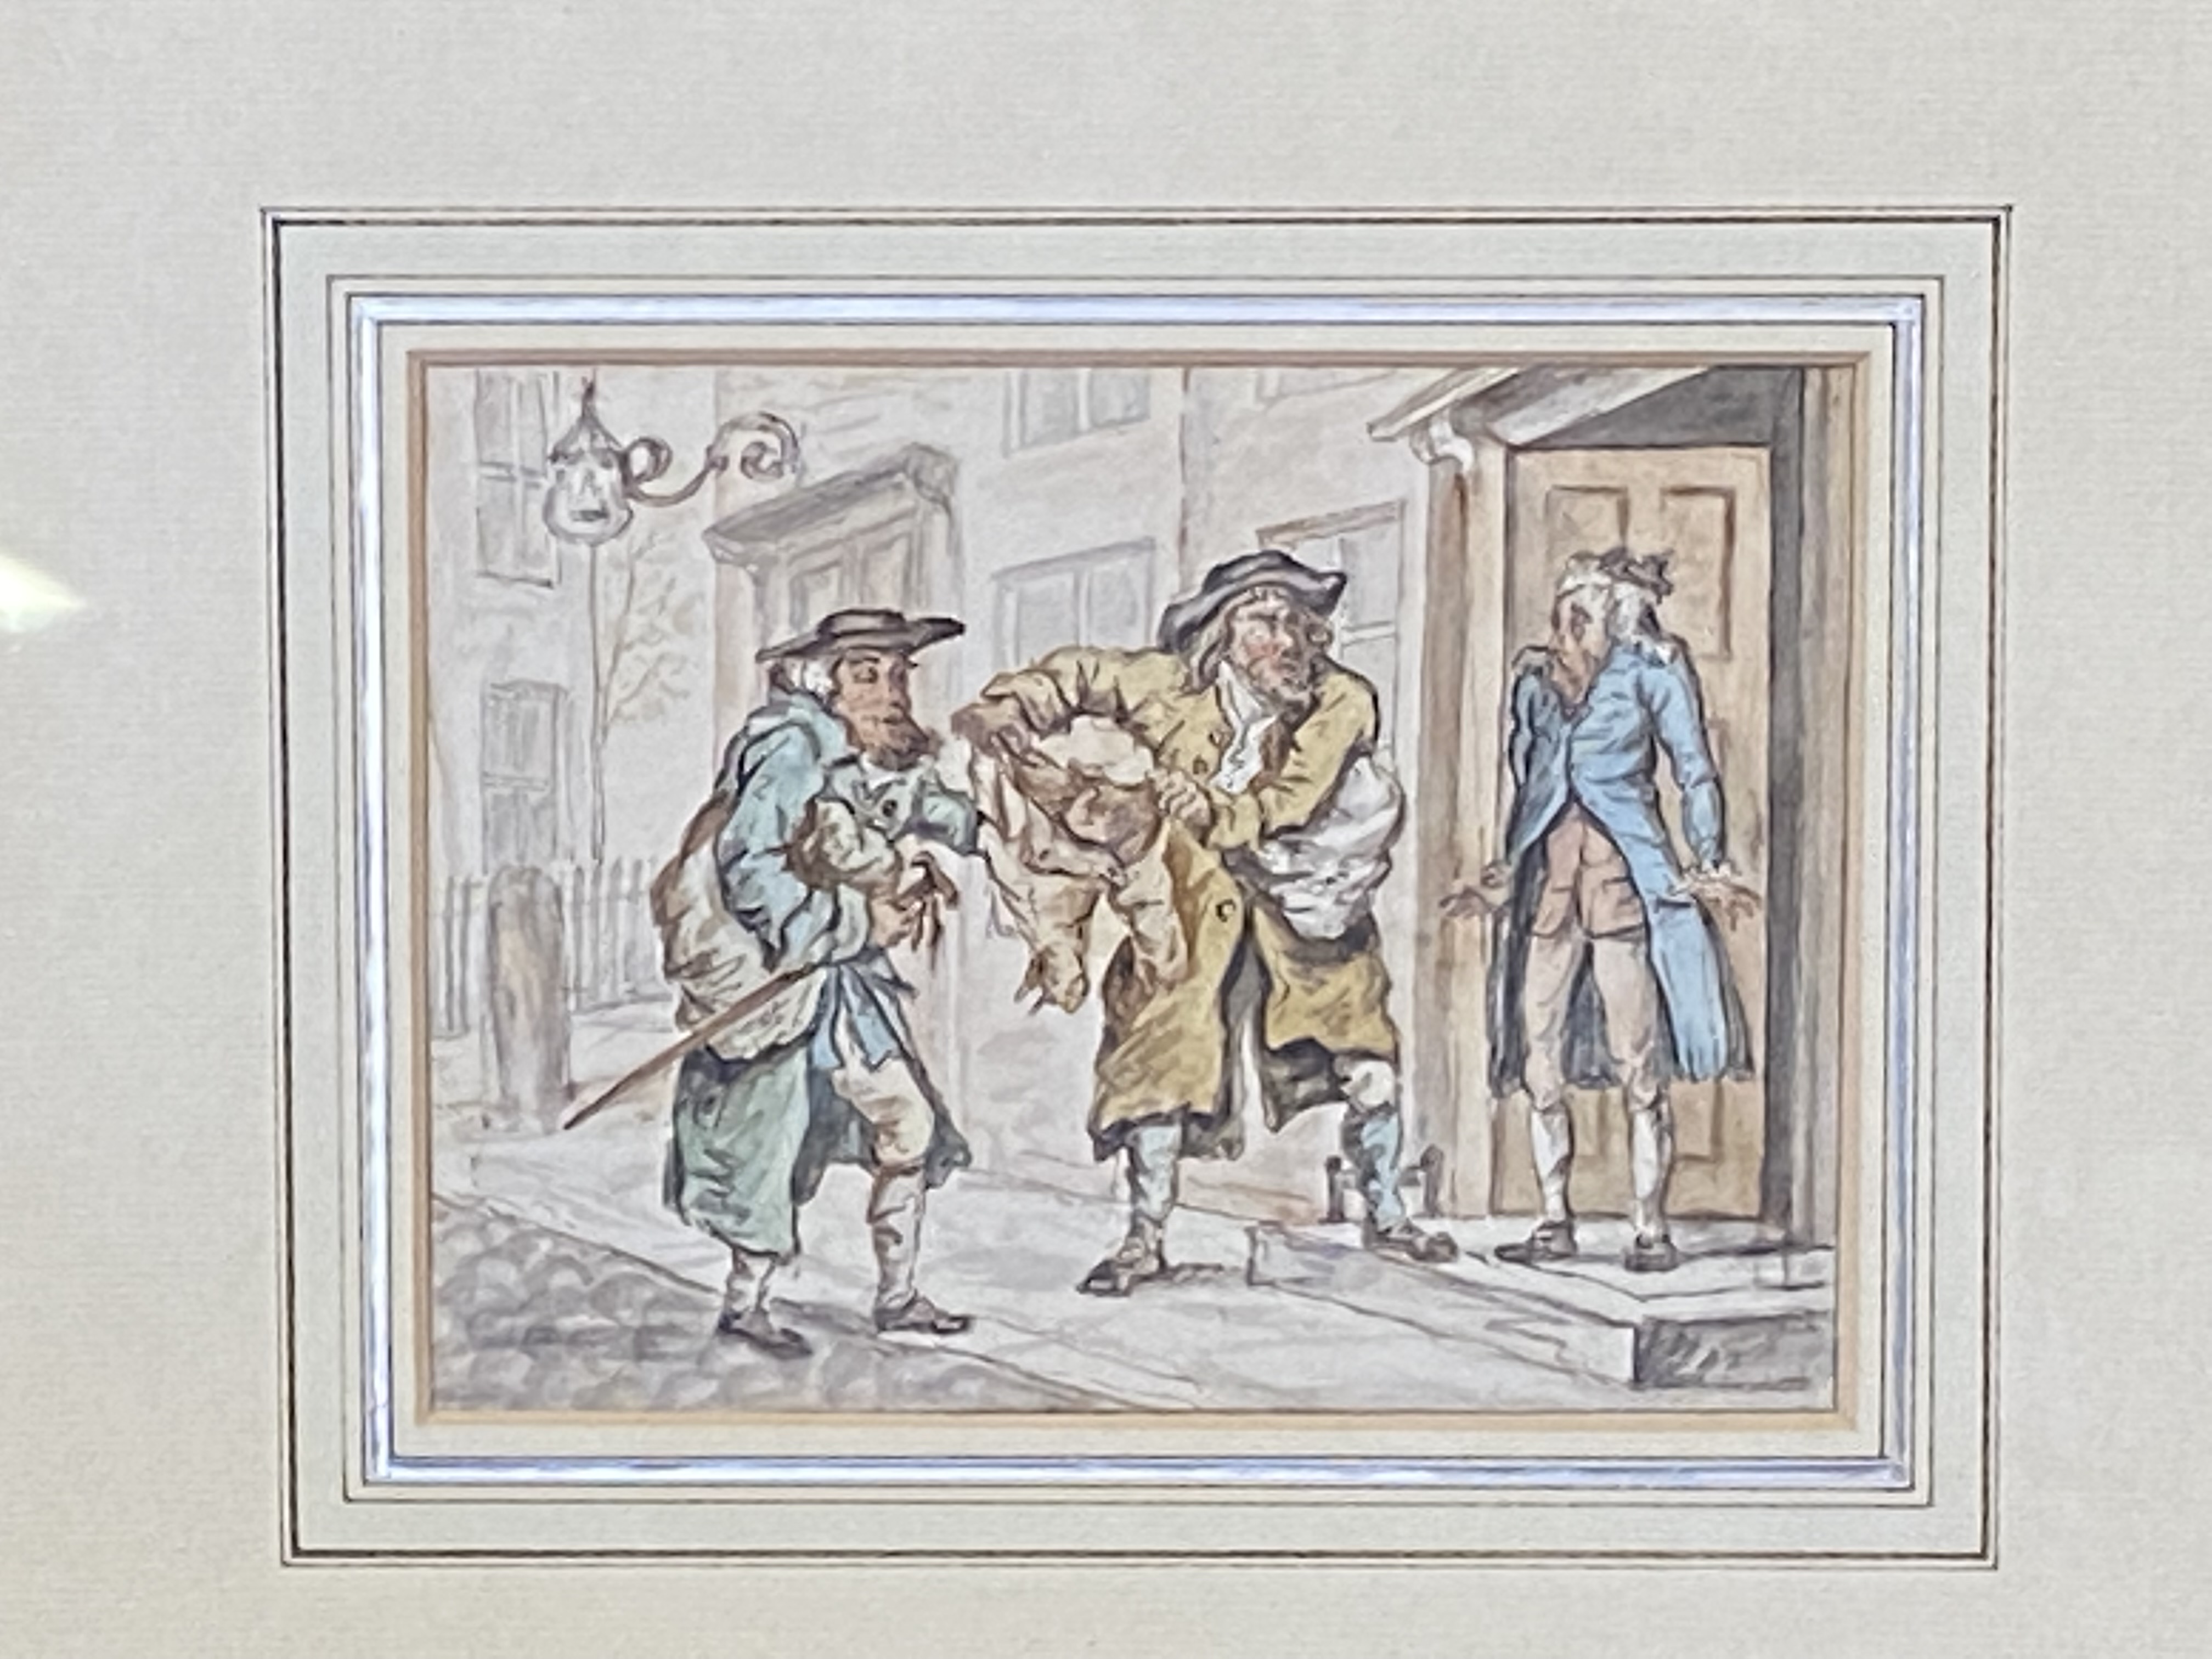 Framed and glazed watercolour, The Old Clothes Dealers, Henry William Bunbury